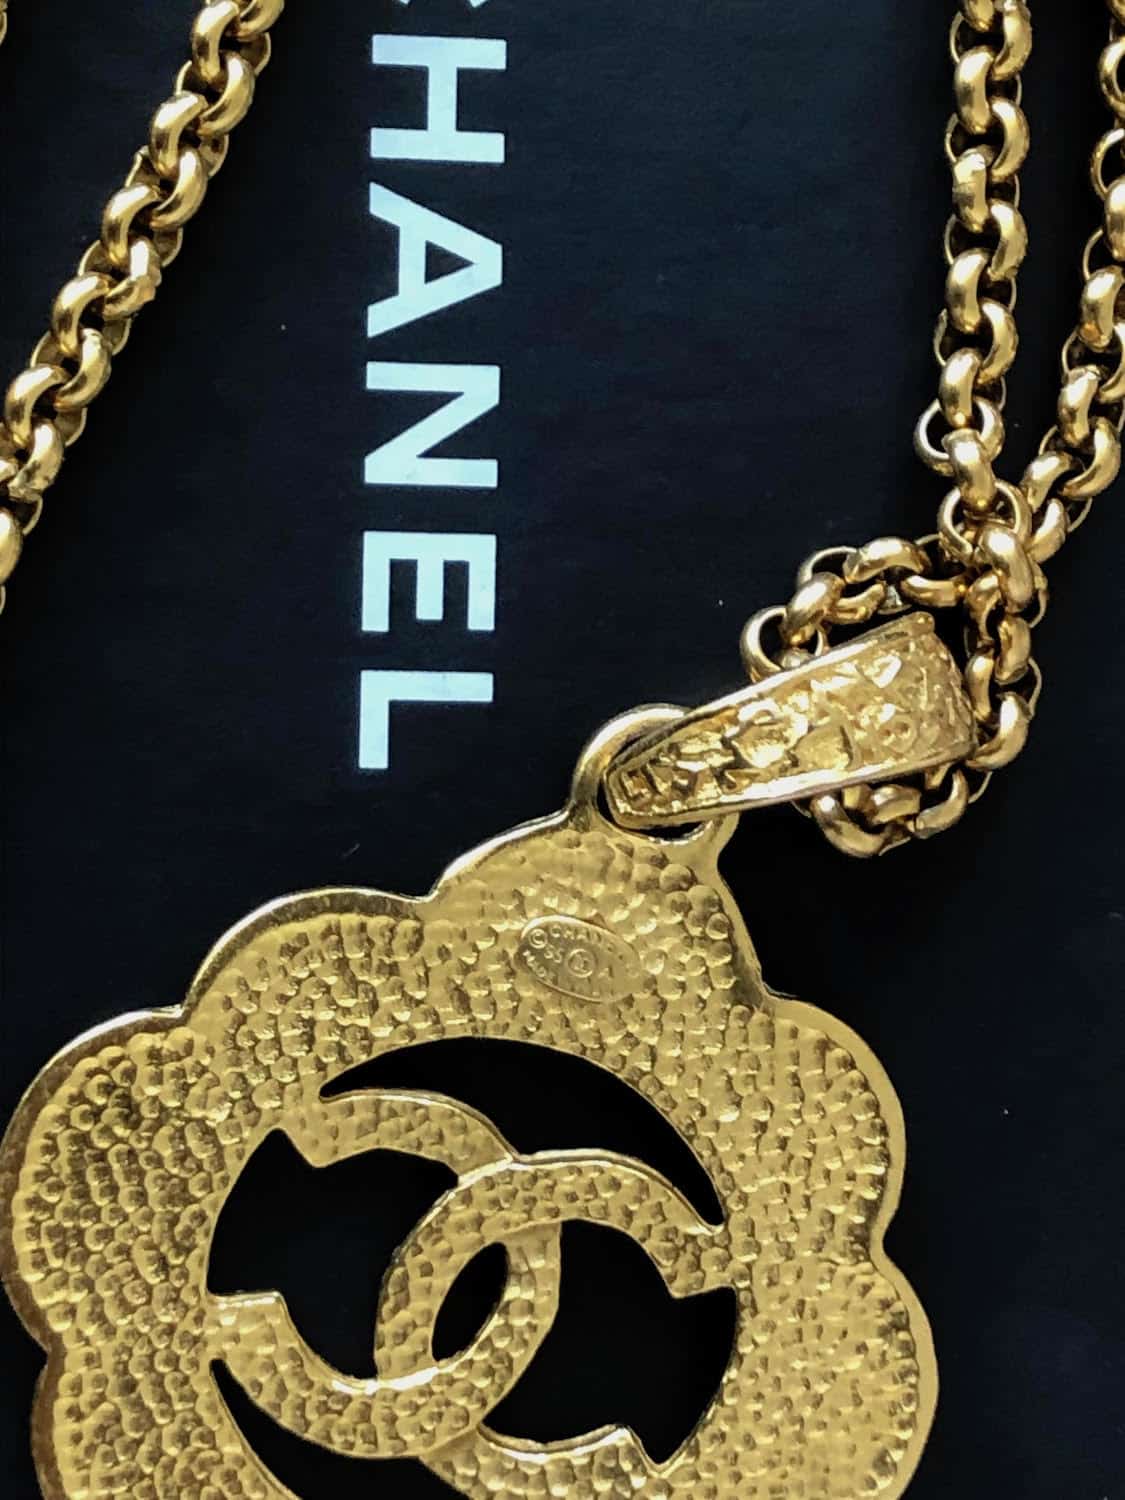 Chanel Pre-owned 1995 Clover-Pendant Chain Necklace